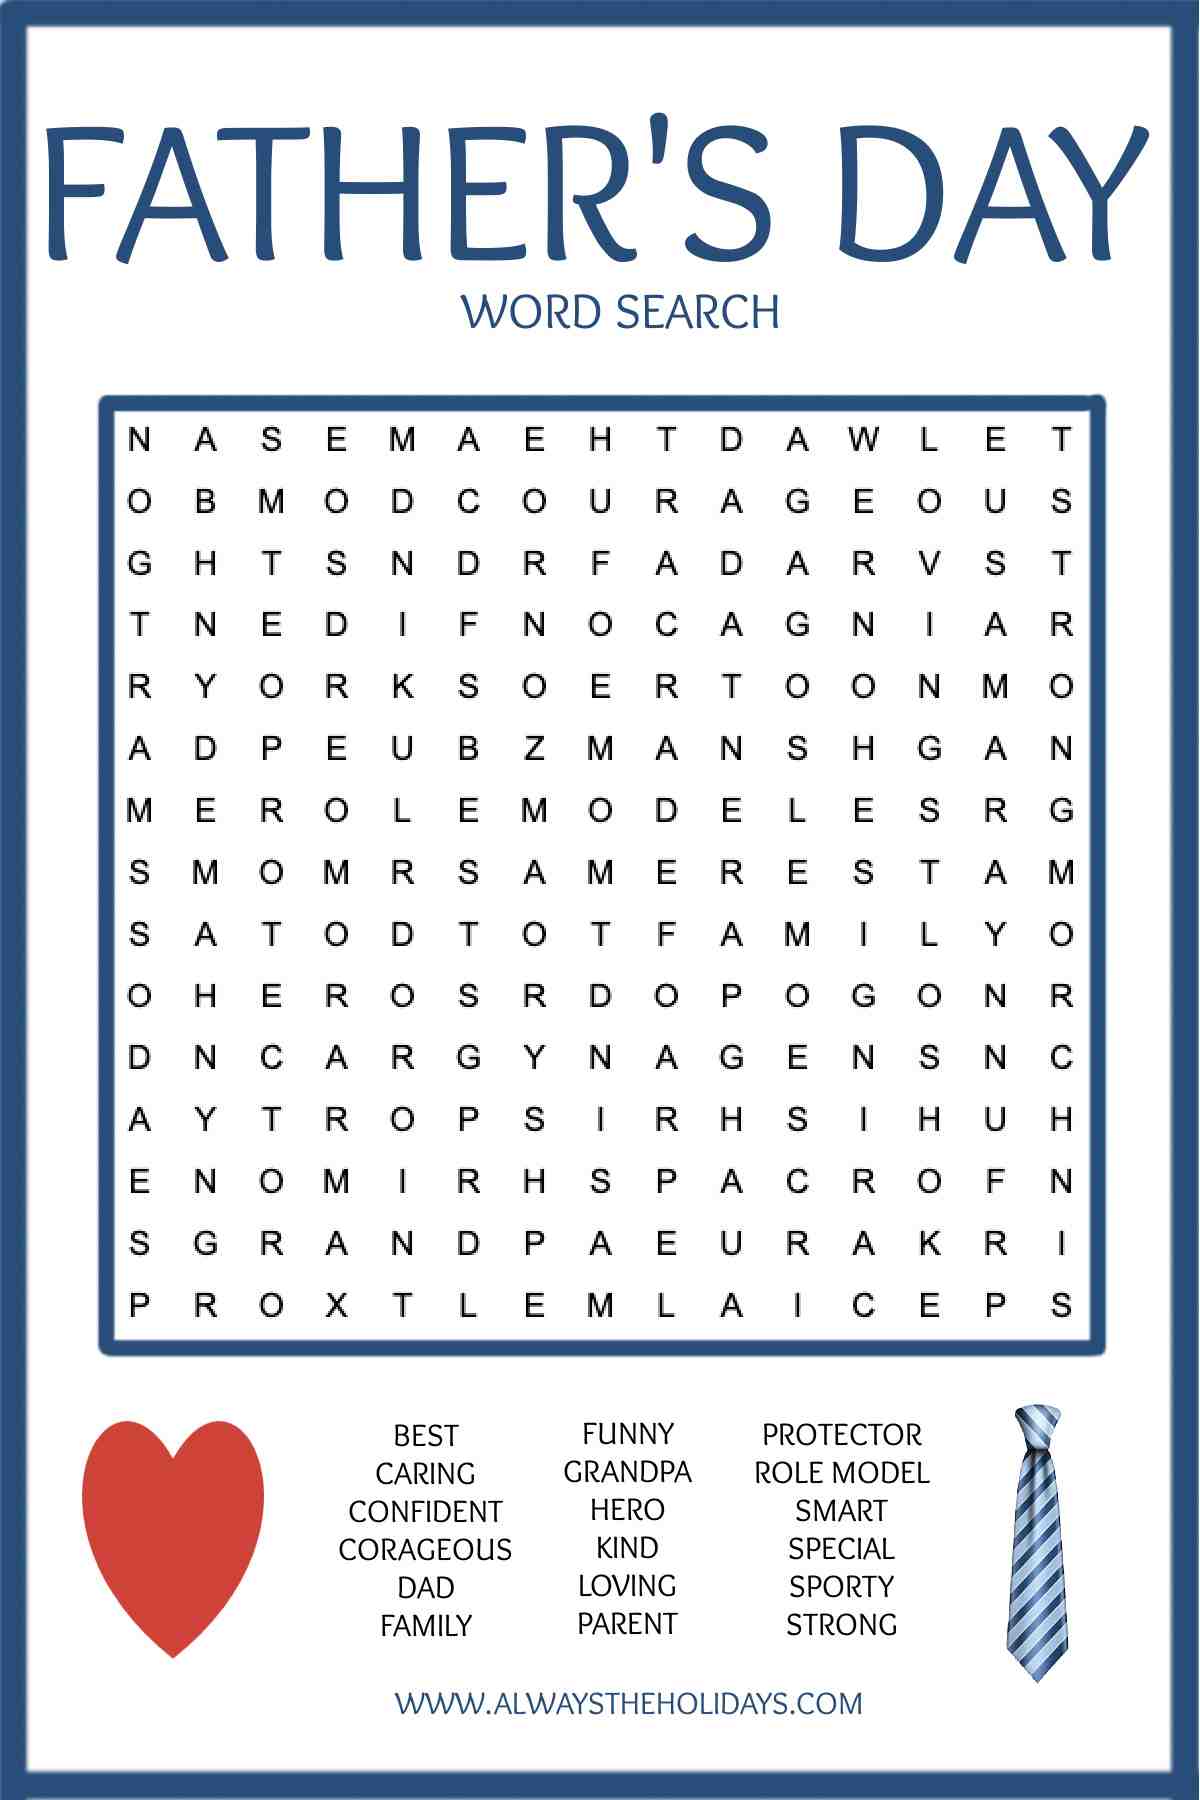 Easy word search for Father's Day with a free word search printable puzzle in the middle, a word bank at the bottom and the words "Father's Day" at the top.